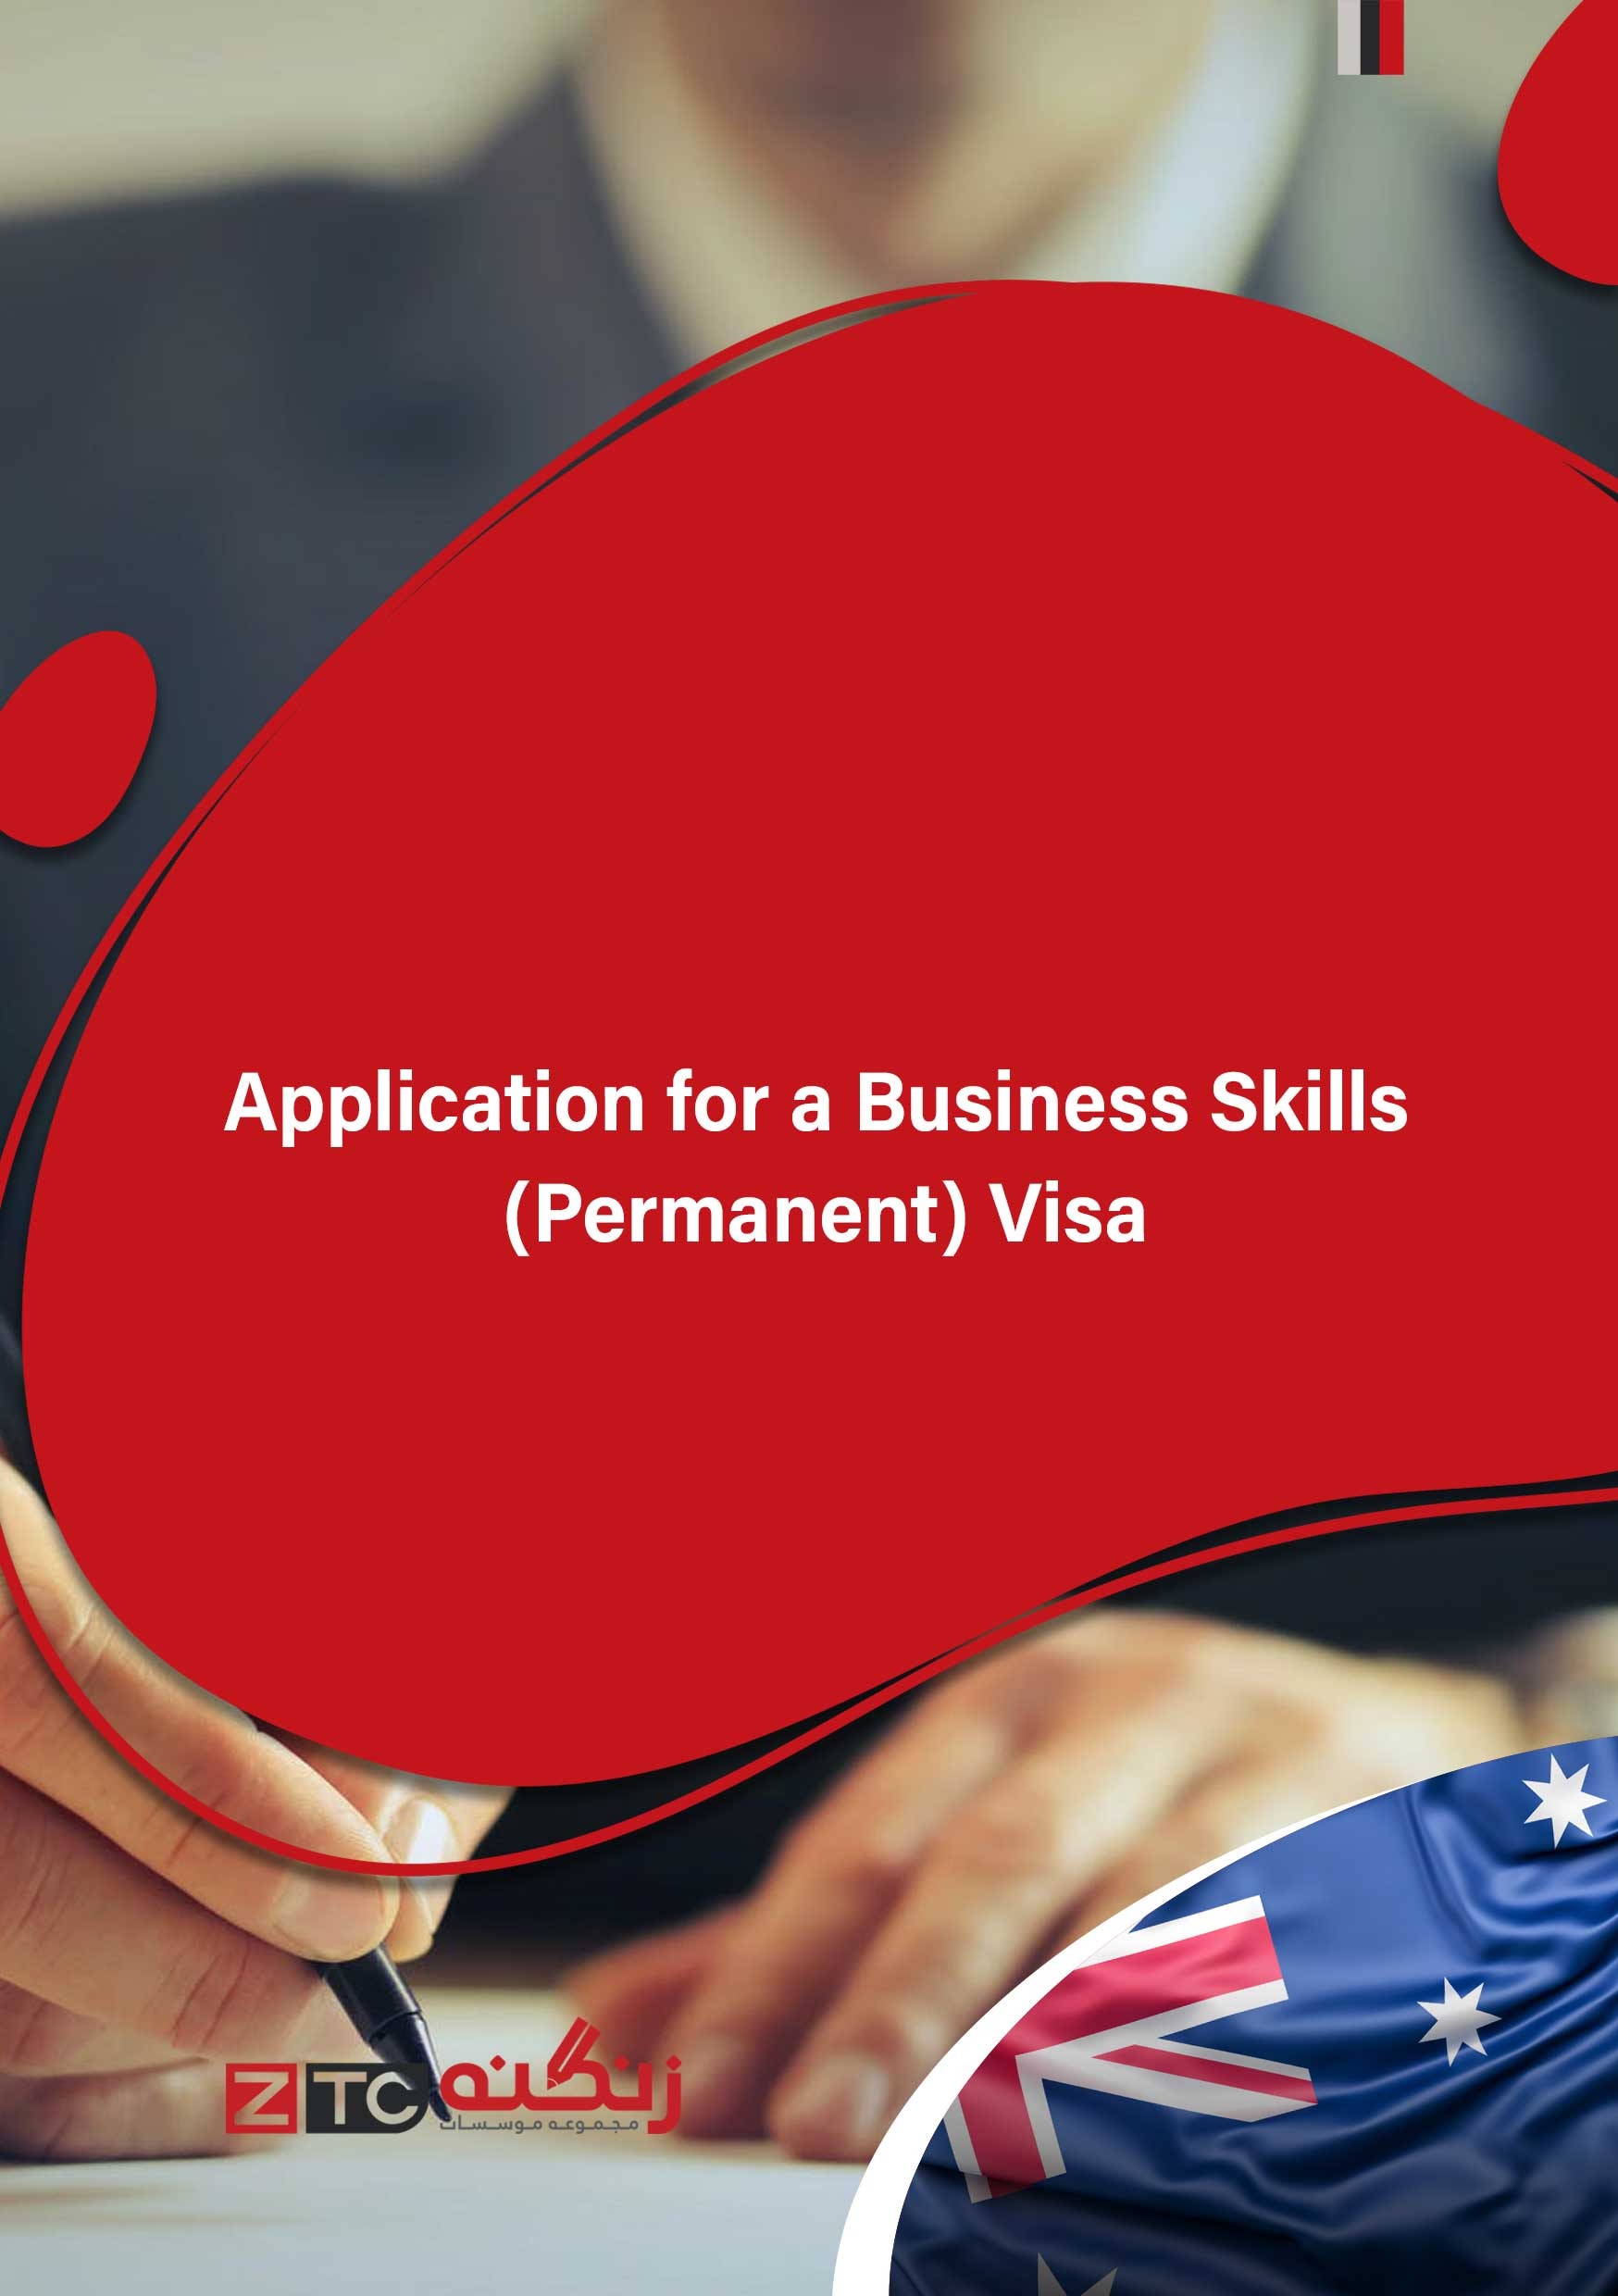 Application for a Business Skills (Permanent) Visa